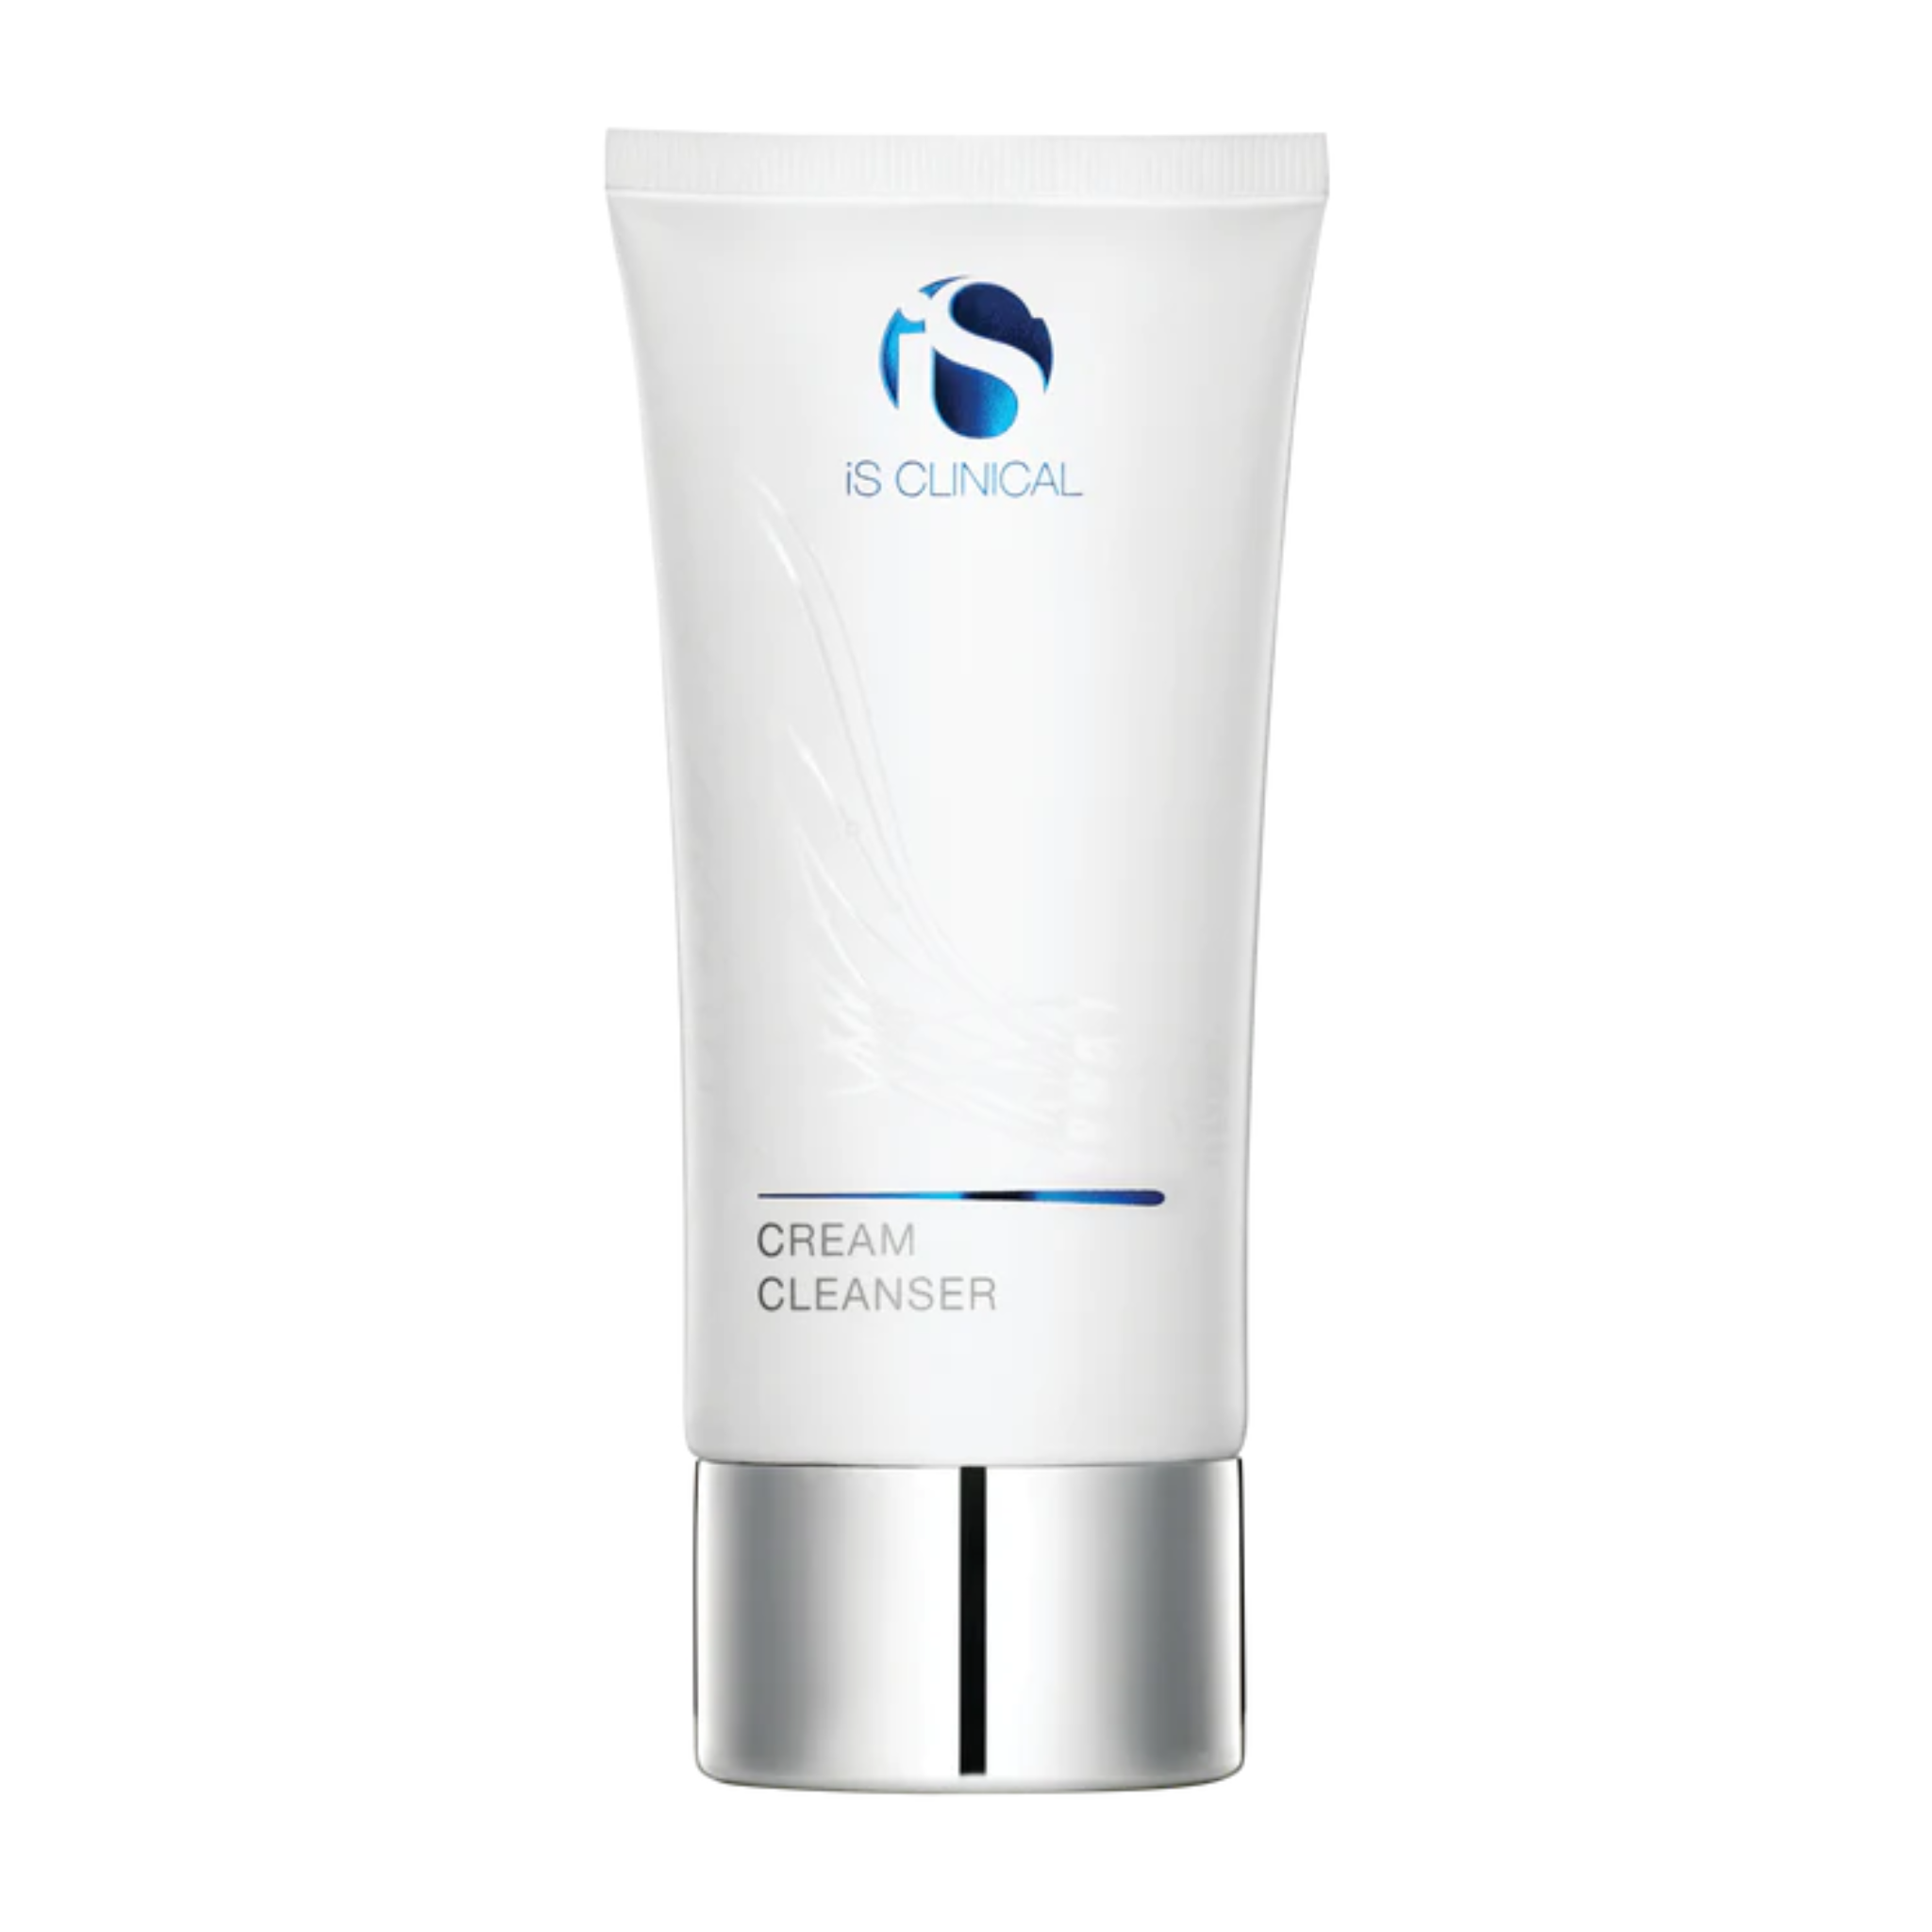 iS Clinical - Cream Cleanser